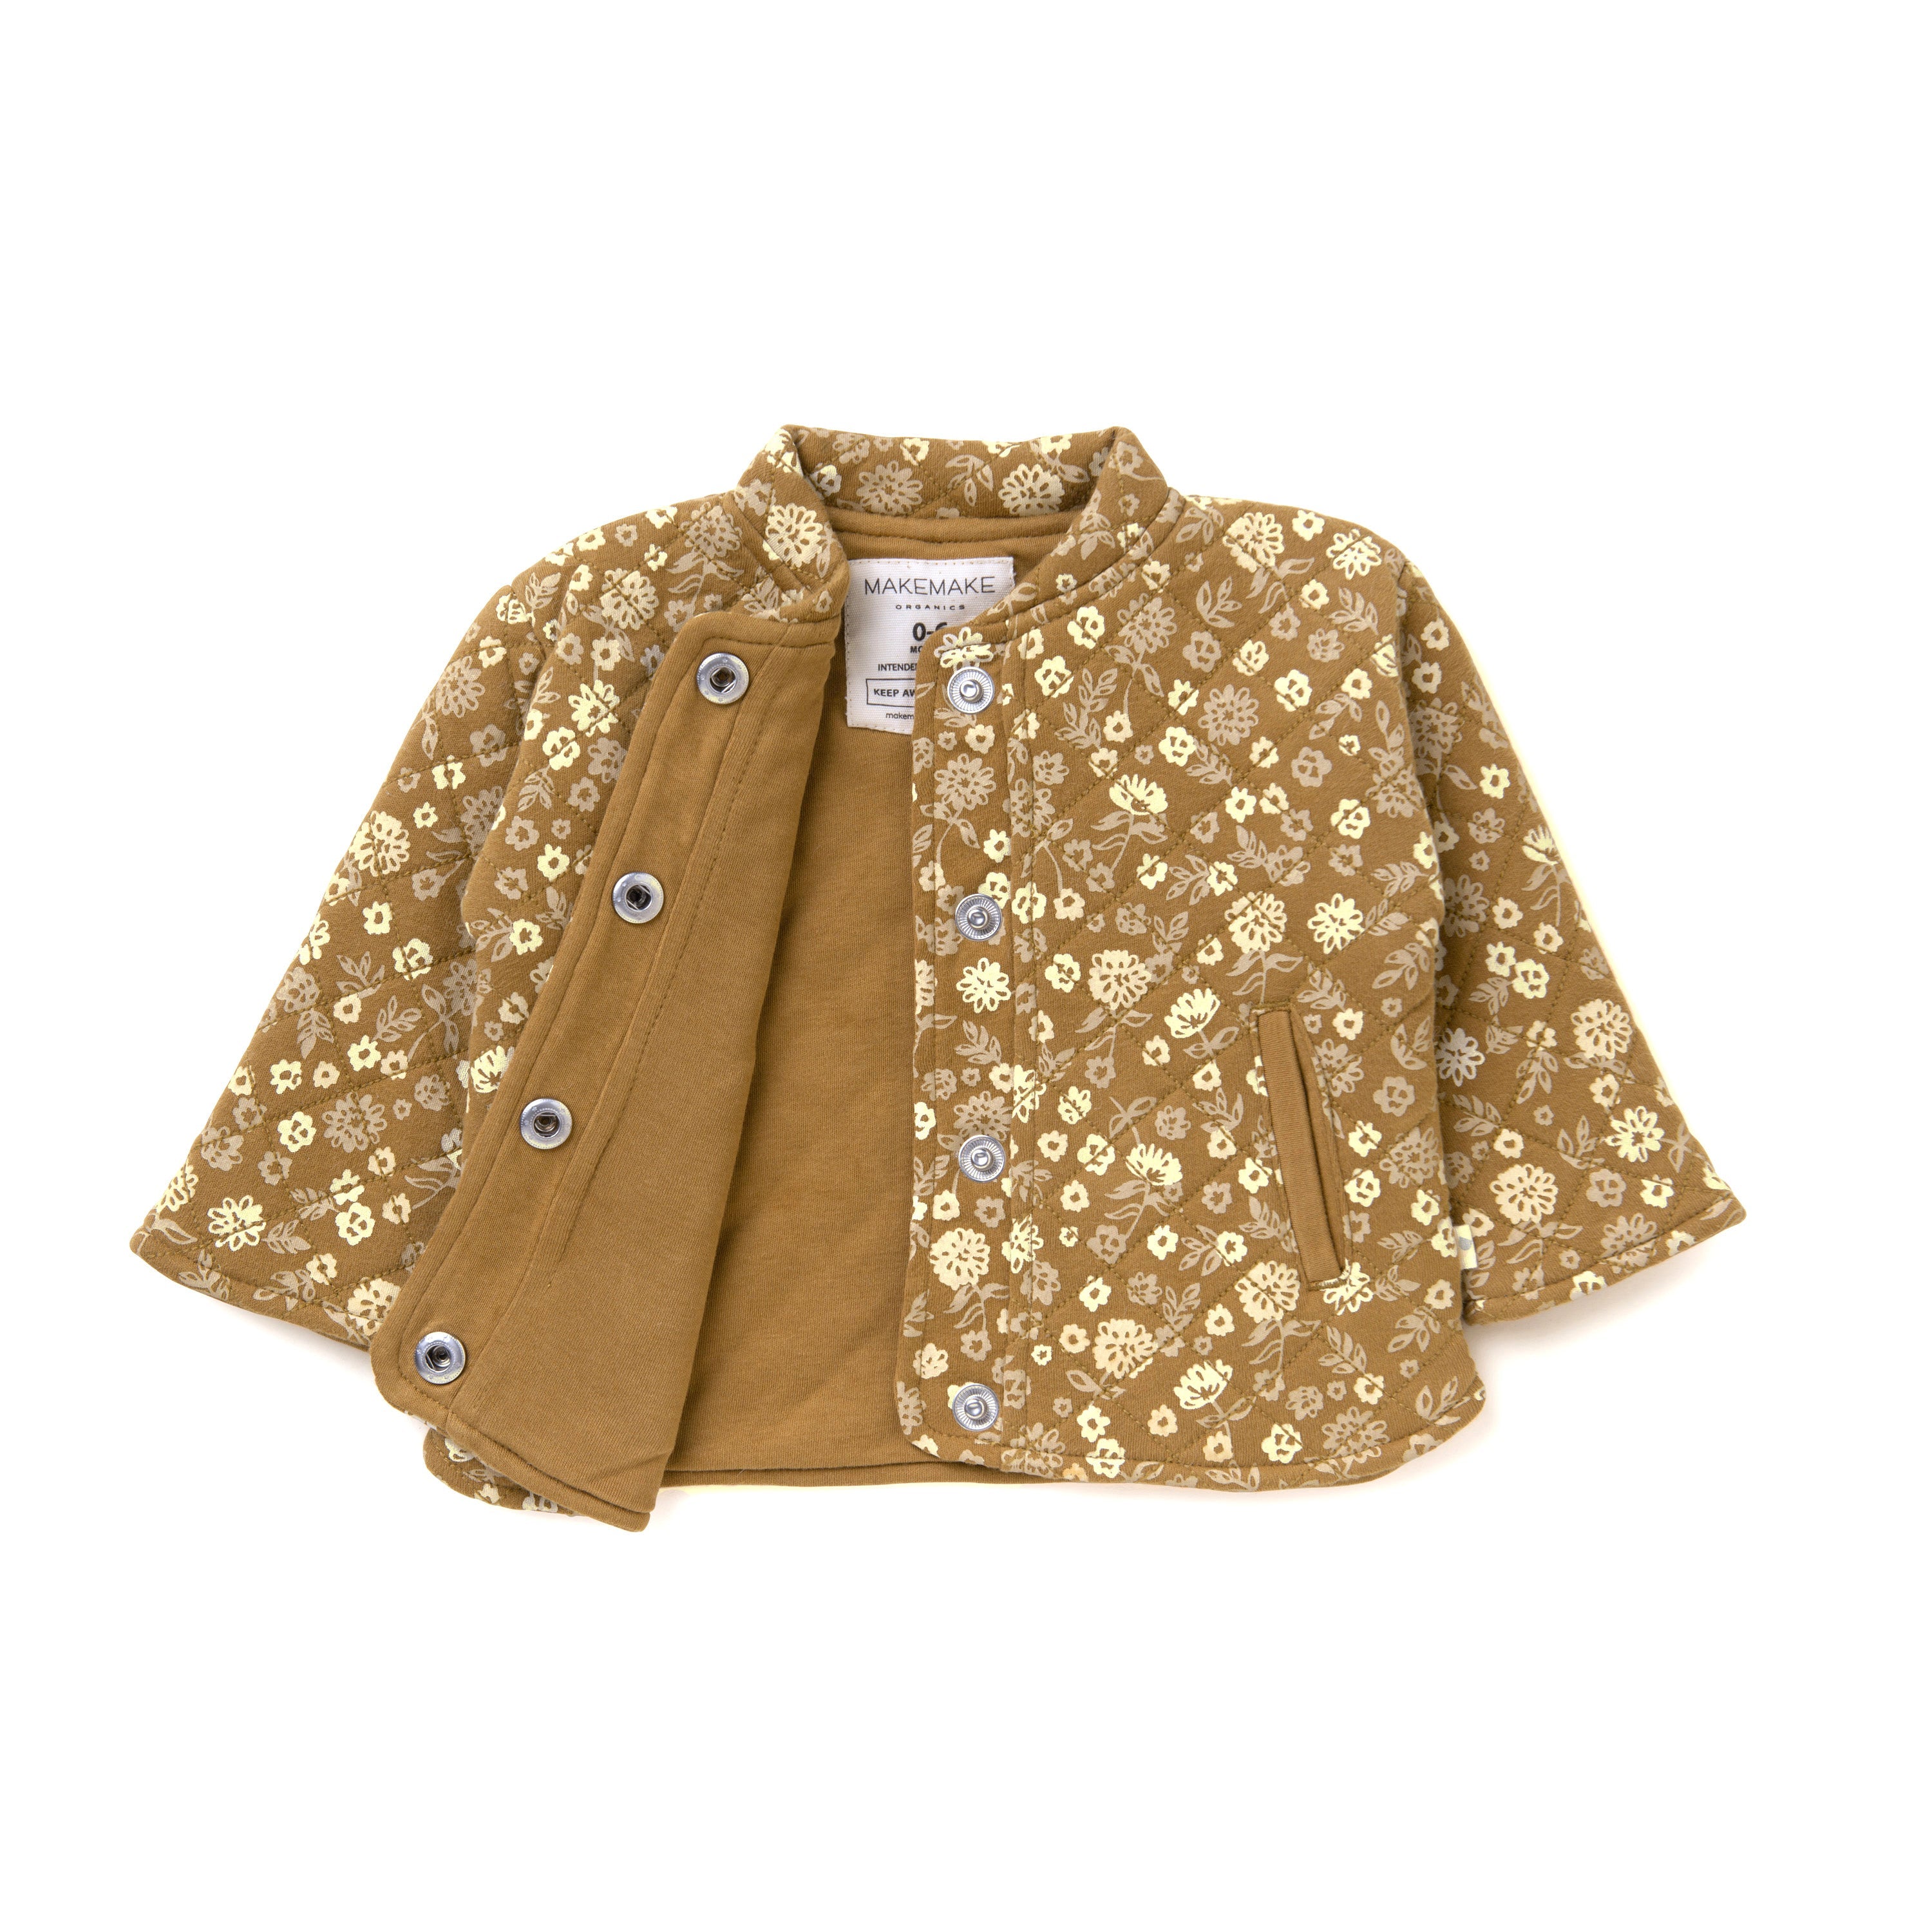 A mustard-yellow children's jacket from Organic Kids with floral patterns displayed on a white background, featuring front snap buttons and a round neckline.